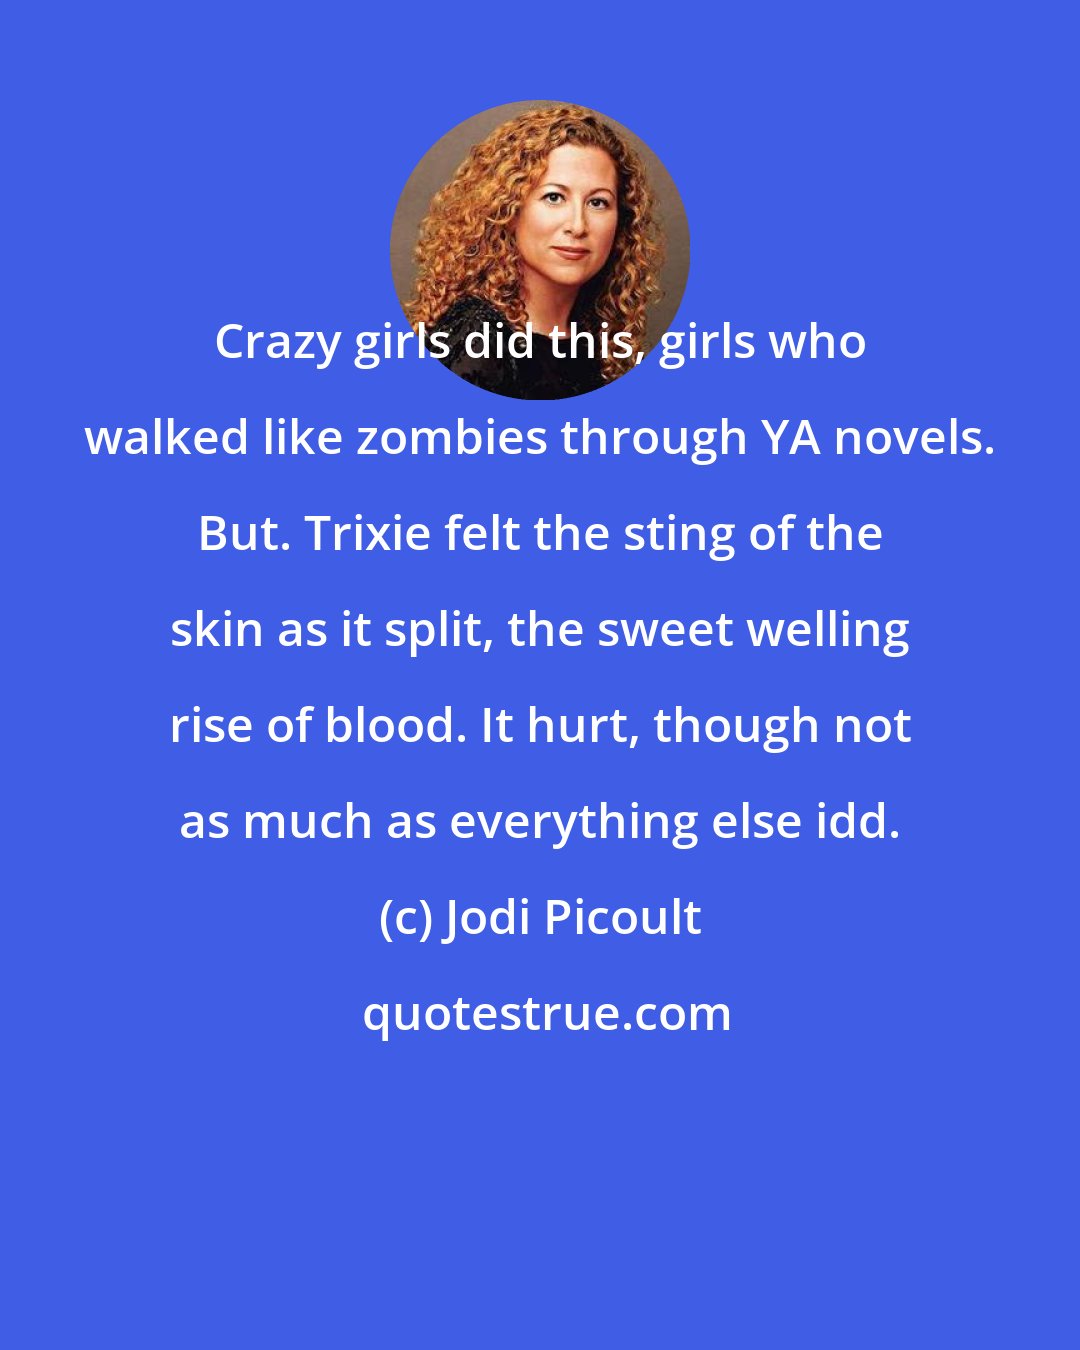 Jodi Picoult: Crazy girls did this, girls who walked like zombies through YA novels. But. Trixie felt the sting of the skin as it split, the sweet welling rise of blood. It hurt, though not as much as everything else idd.